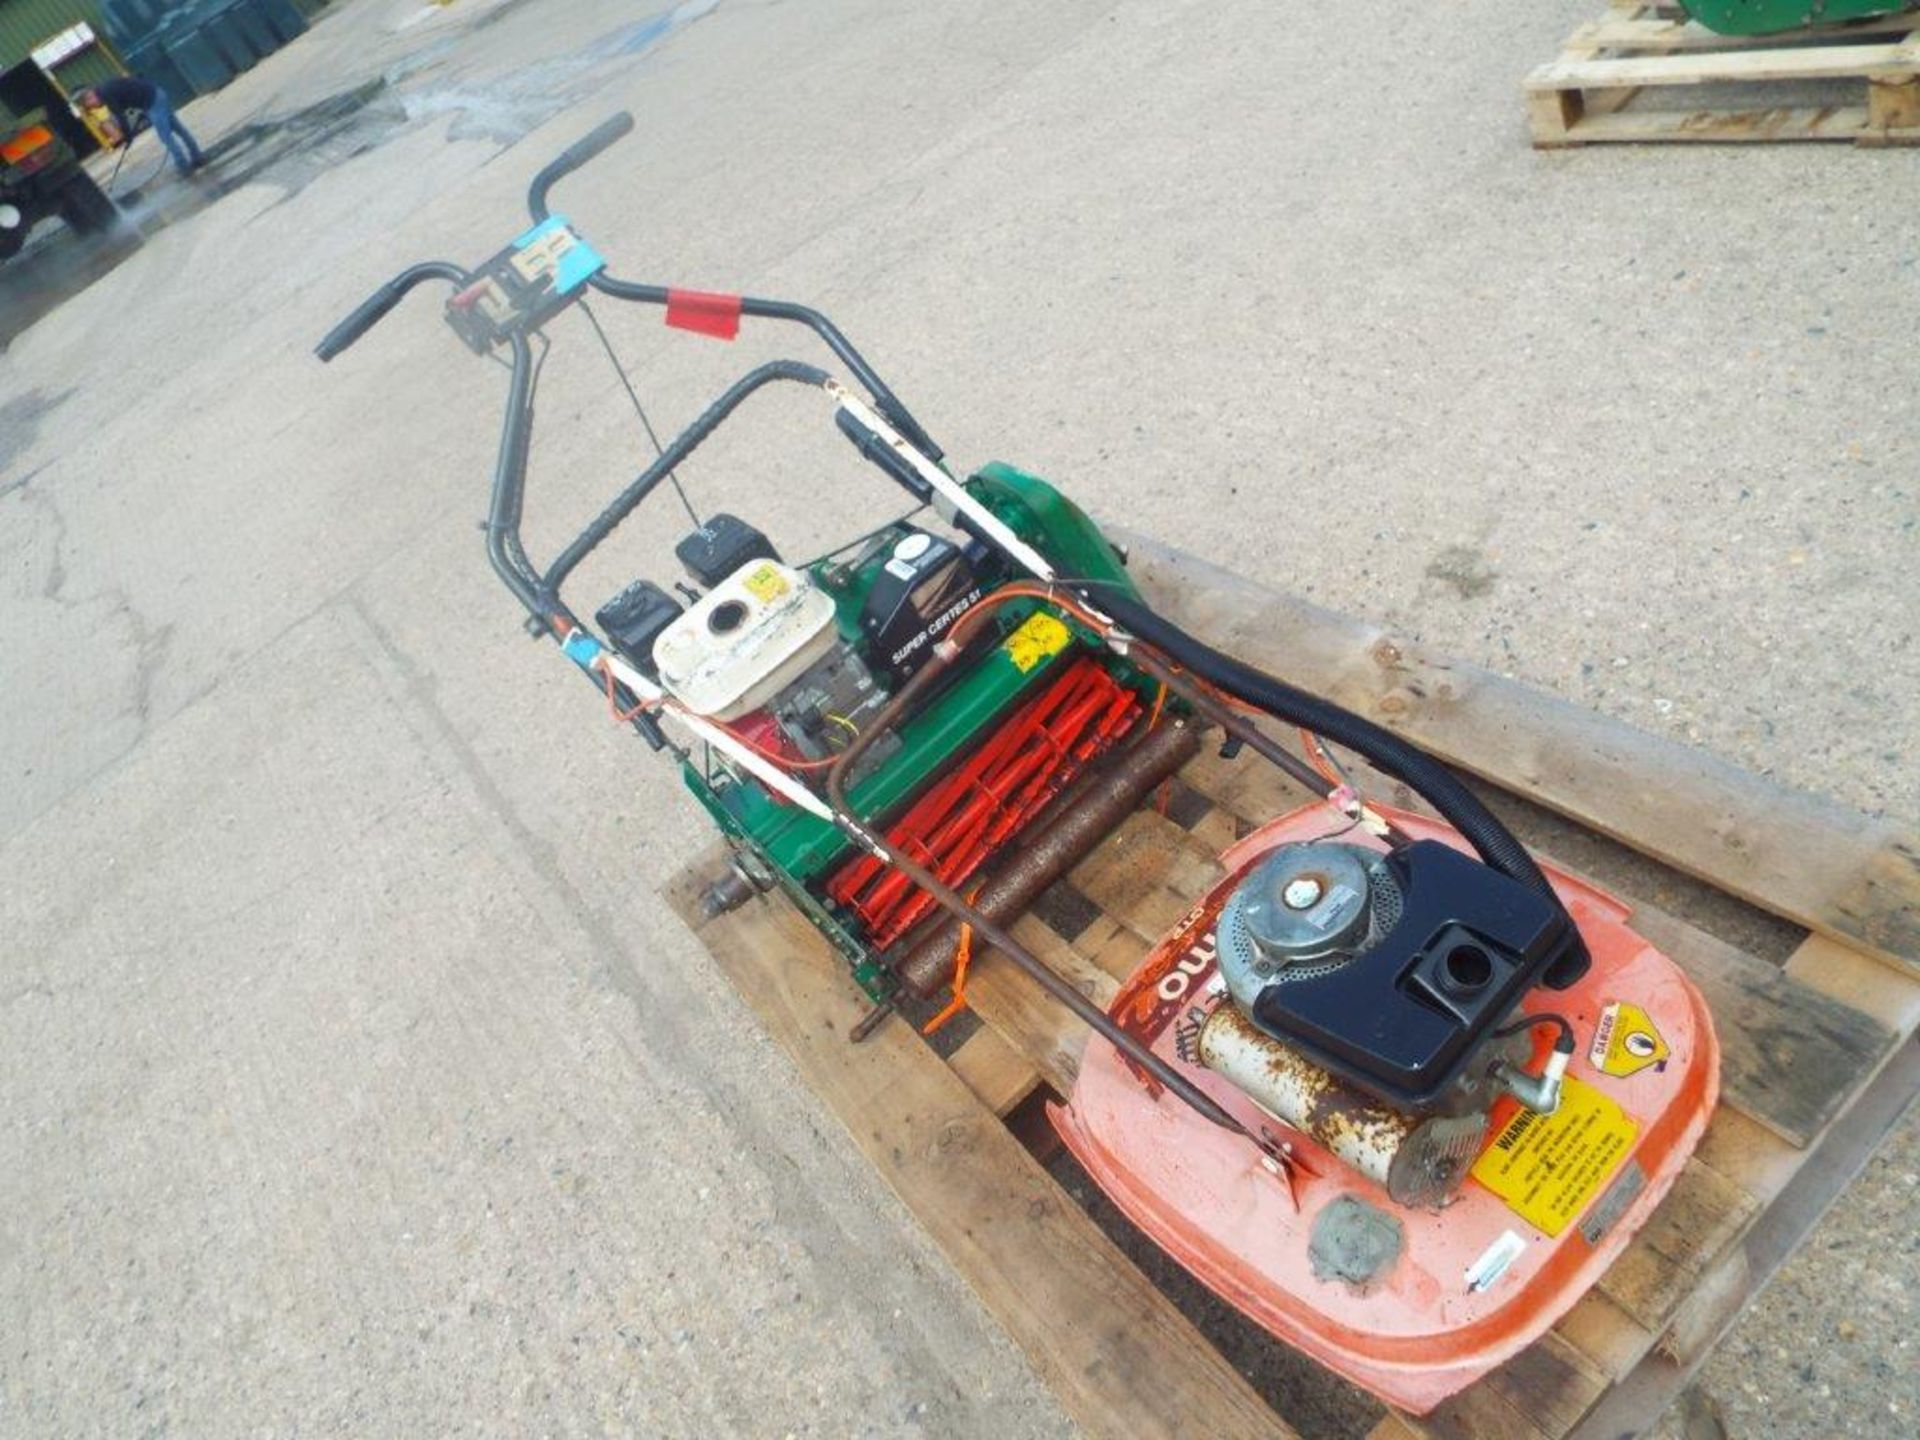 Ransomes Super Certos 51 Reel Lawnmower and Flymo Contactor GT2 Mower